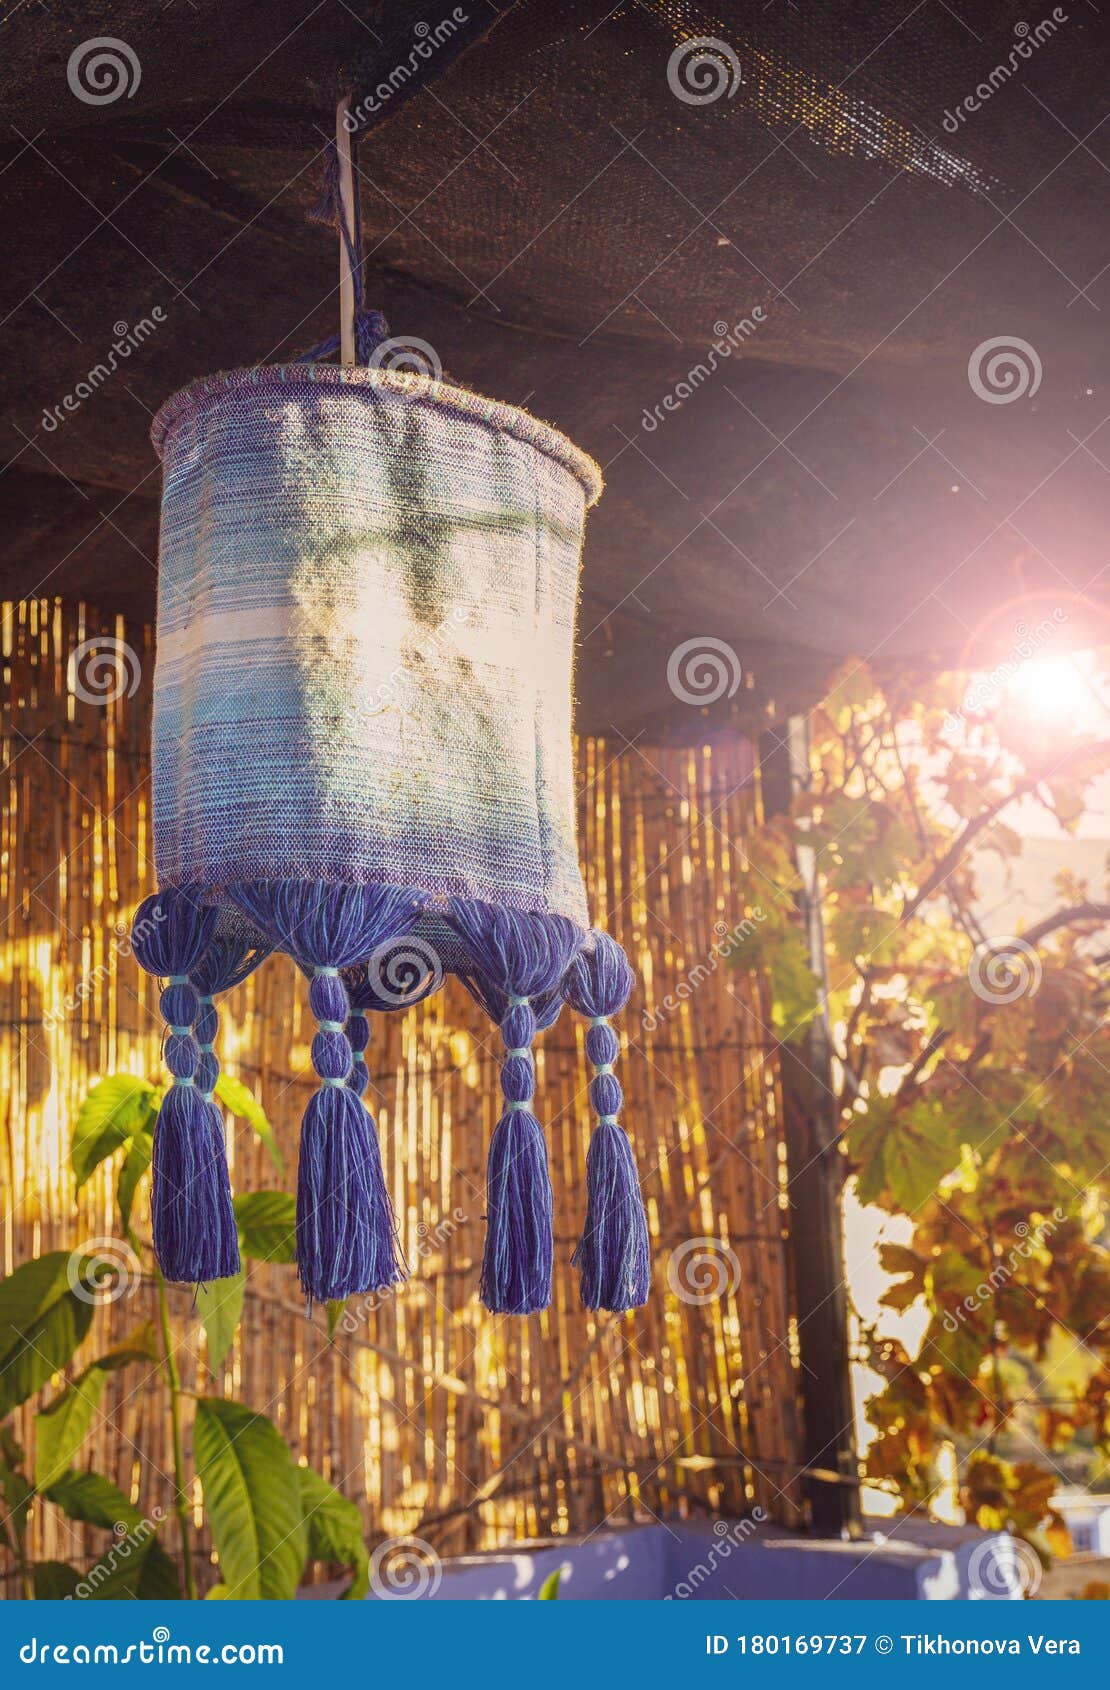 Moroccan Lampshade on the Evening Outdoor Terrace Stock Image - Image